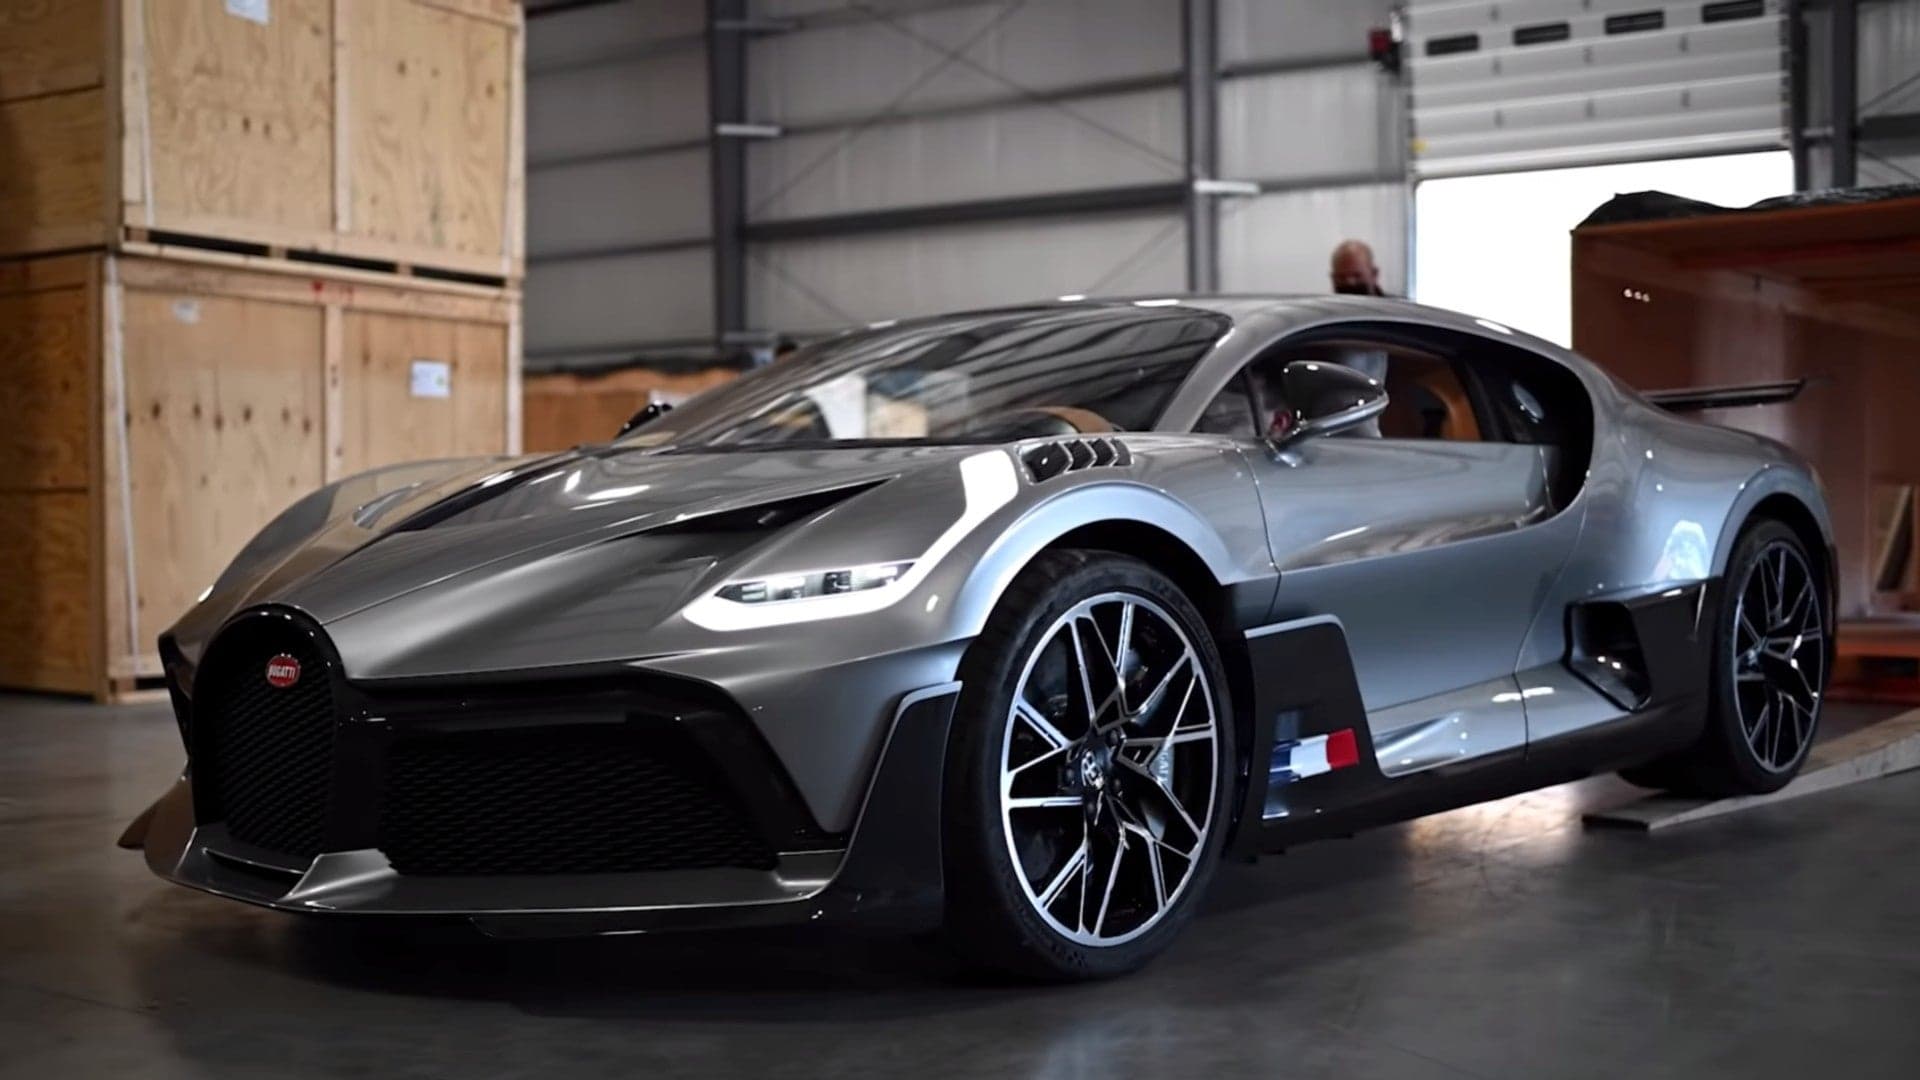 $5.8M Bugatti Divo Delivery Is the Coolest Unboxing Video You’ll Ever See